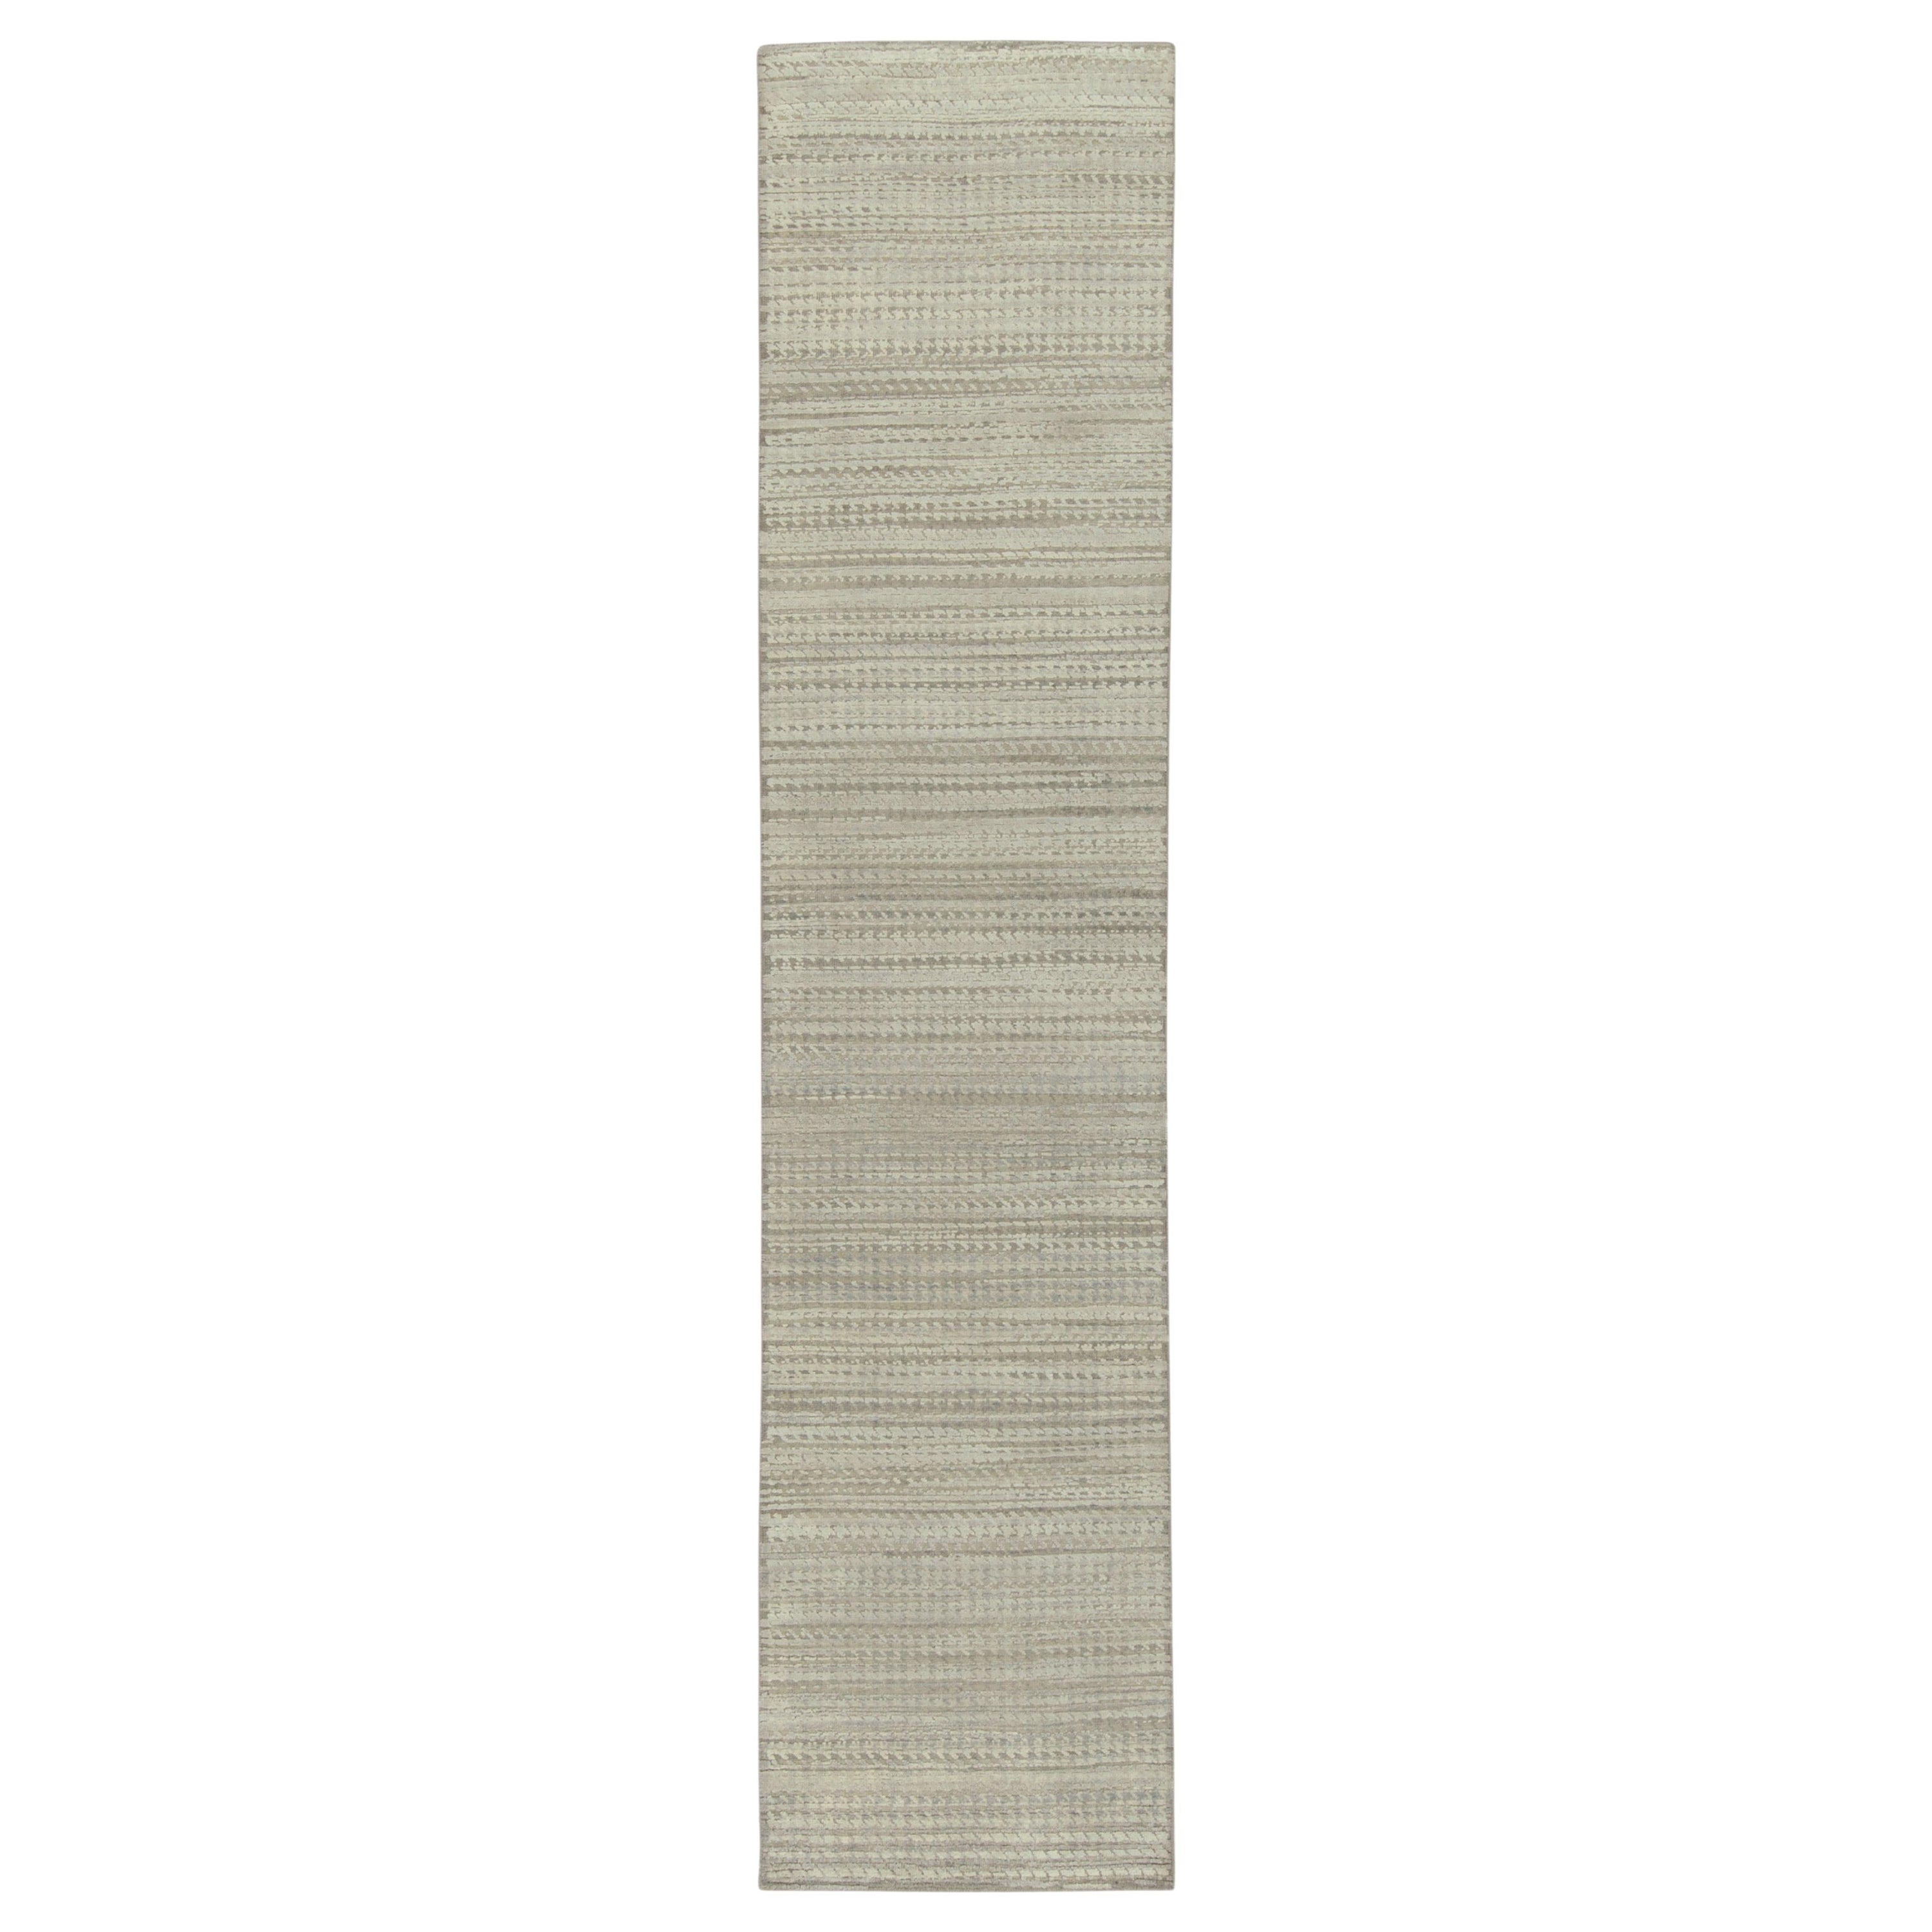 Rug & Kilim’s Contemporary runner in Gray & White High-Low Geometric Pattern